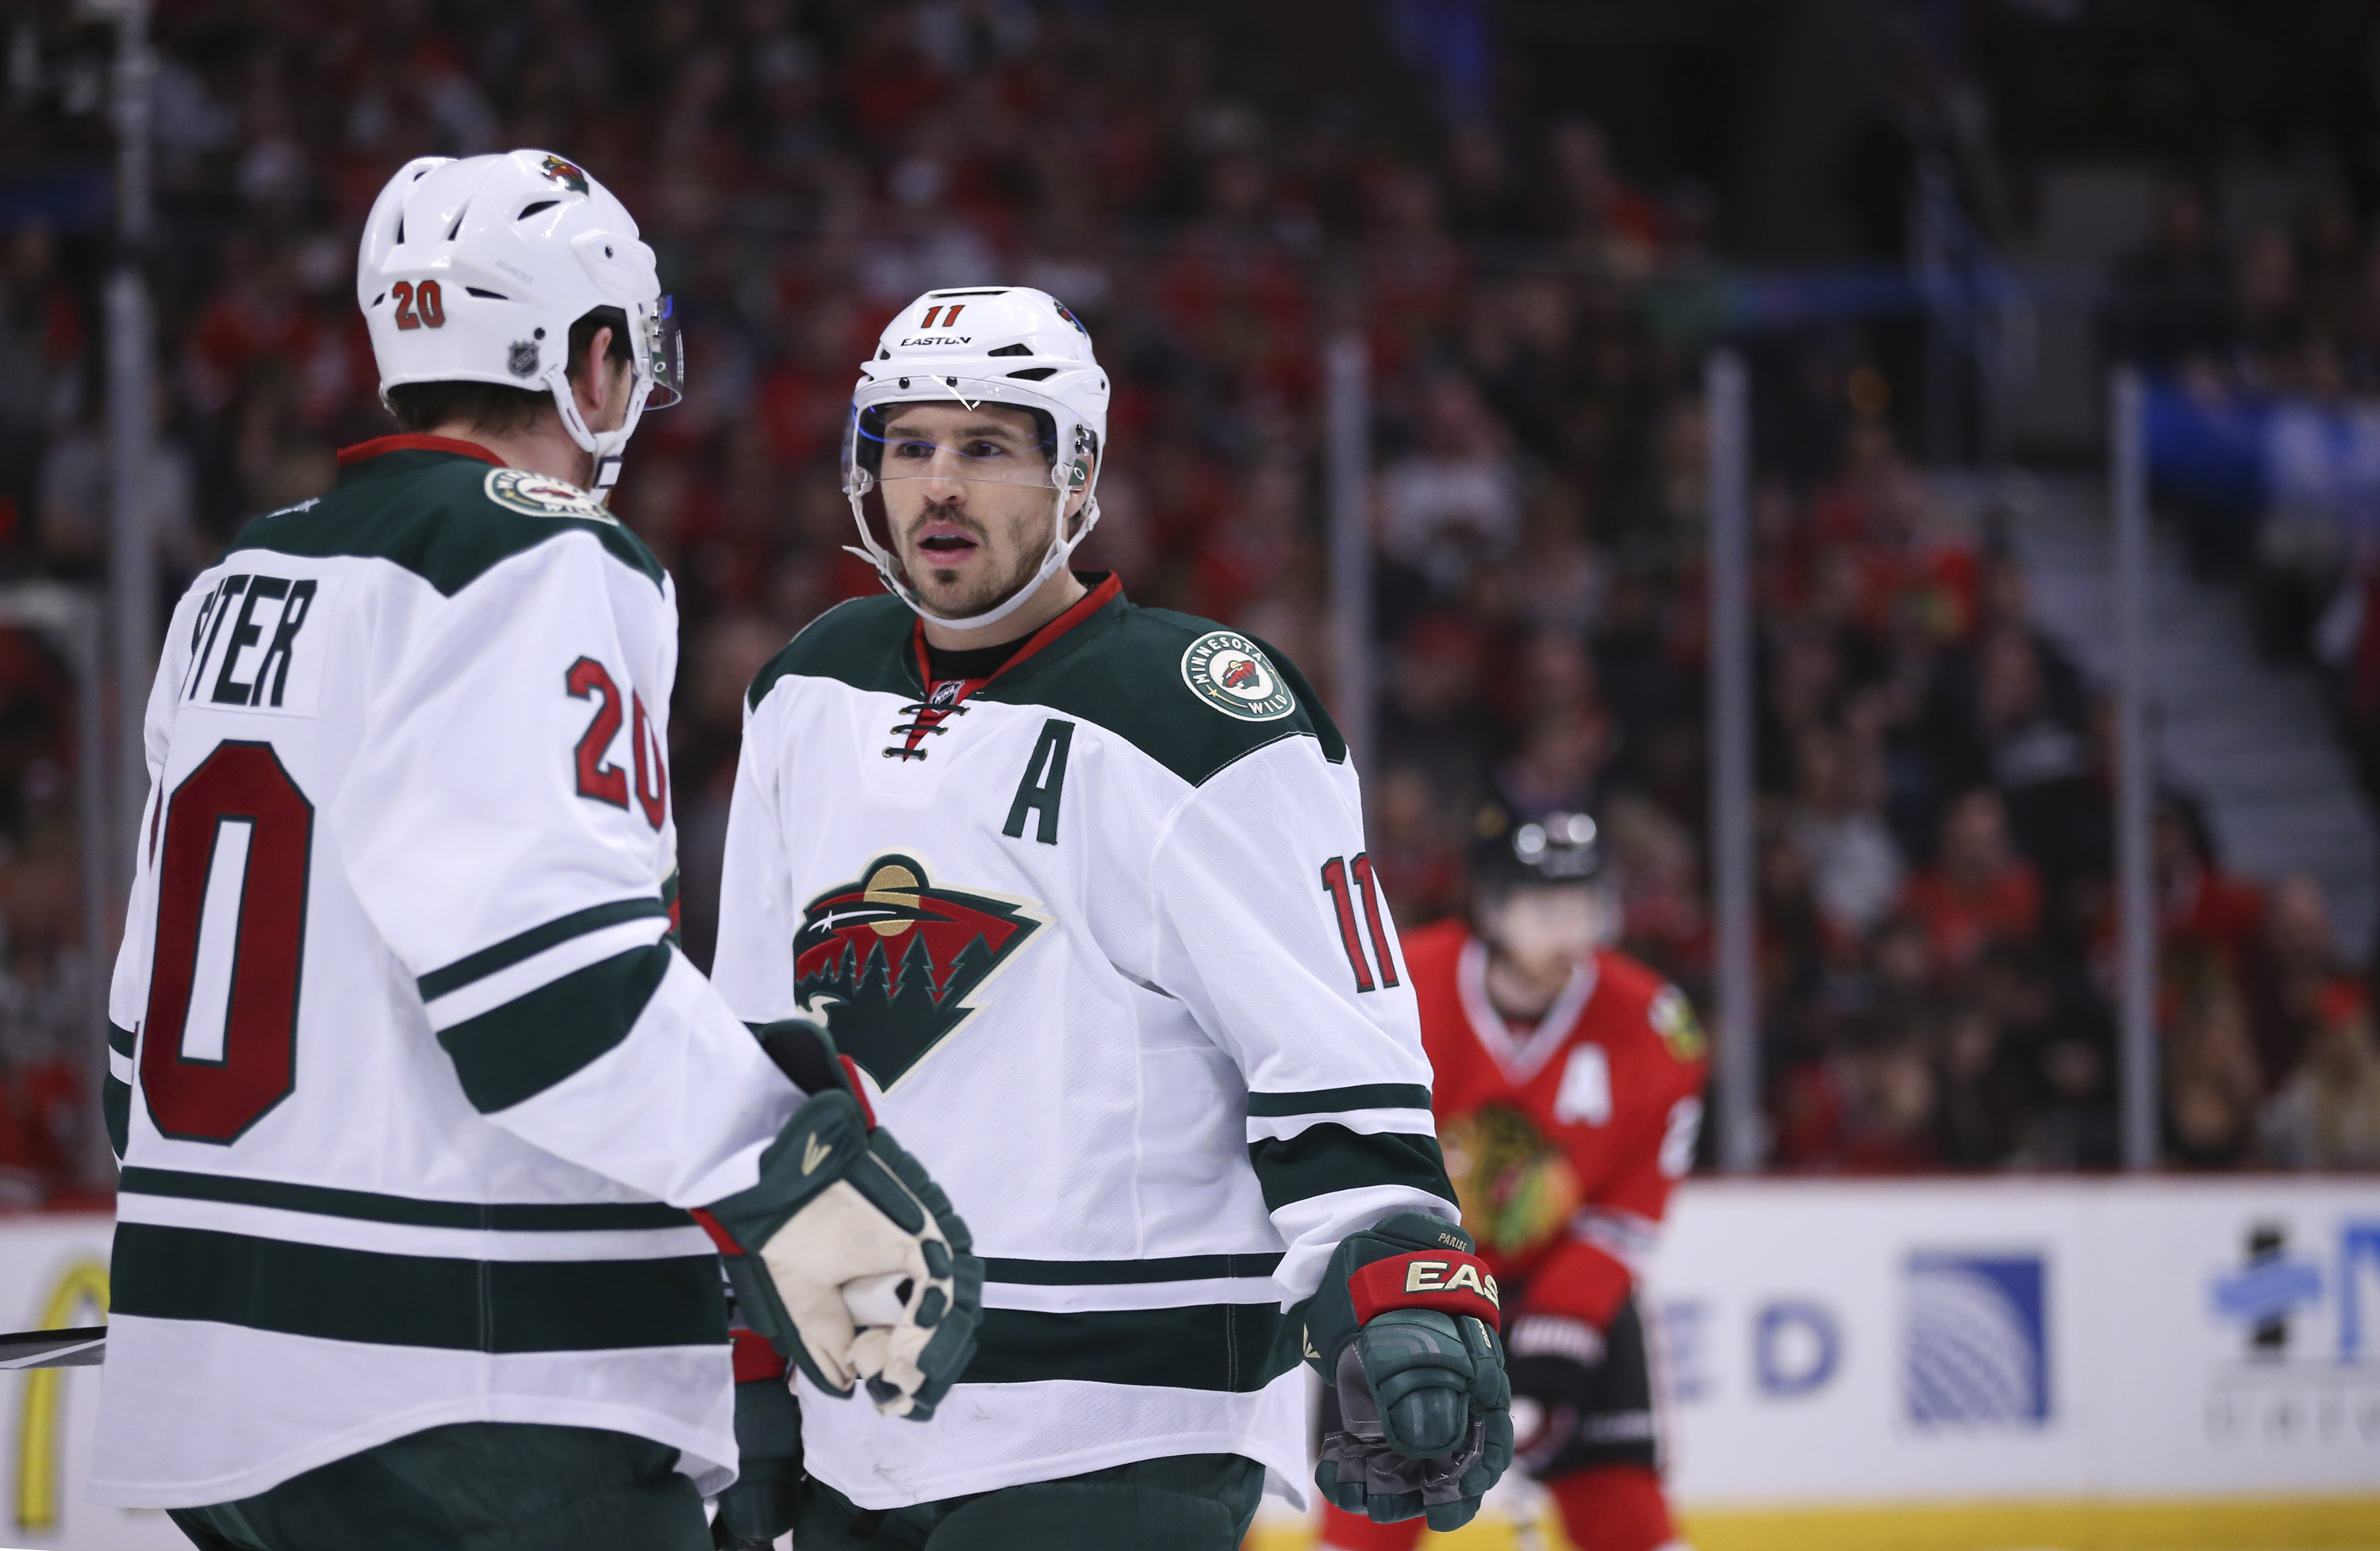 Souhan: Wild wanted both Zach Parise and Ryan Suter gone